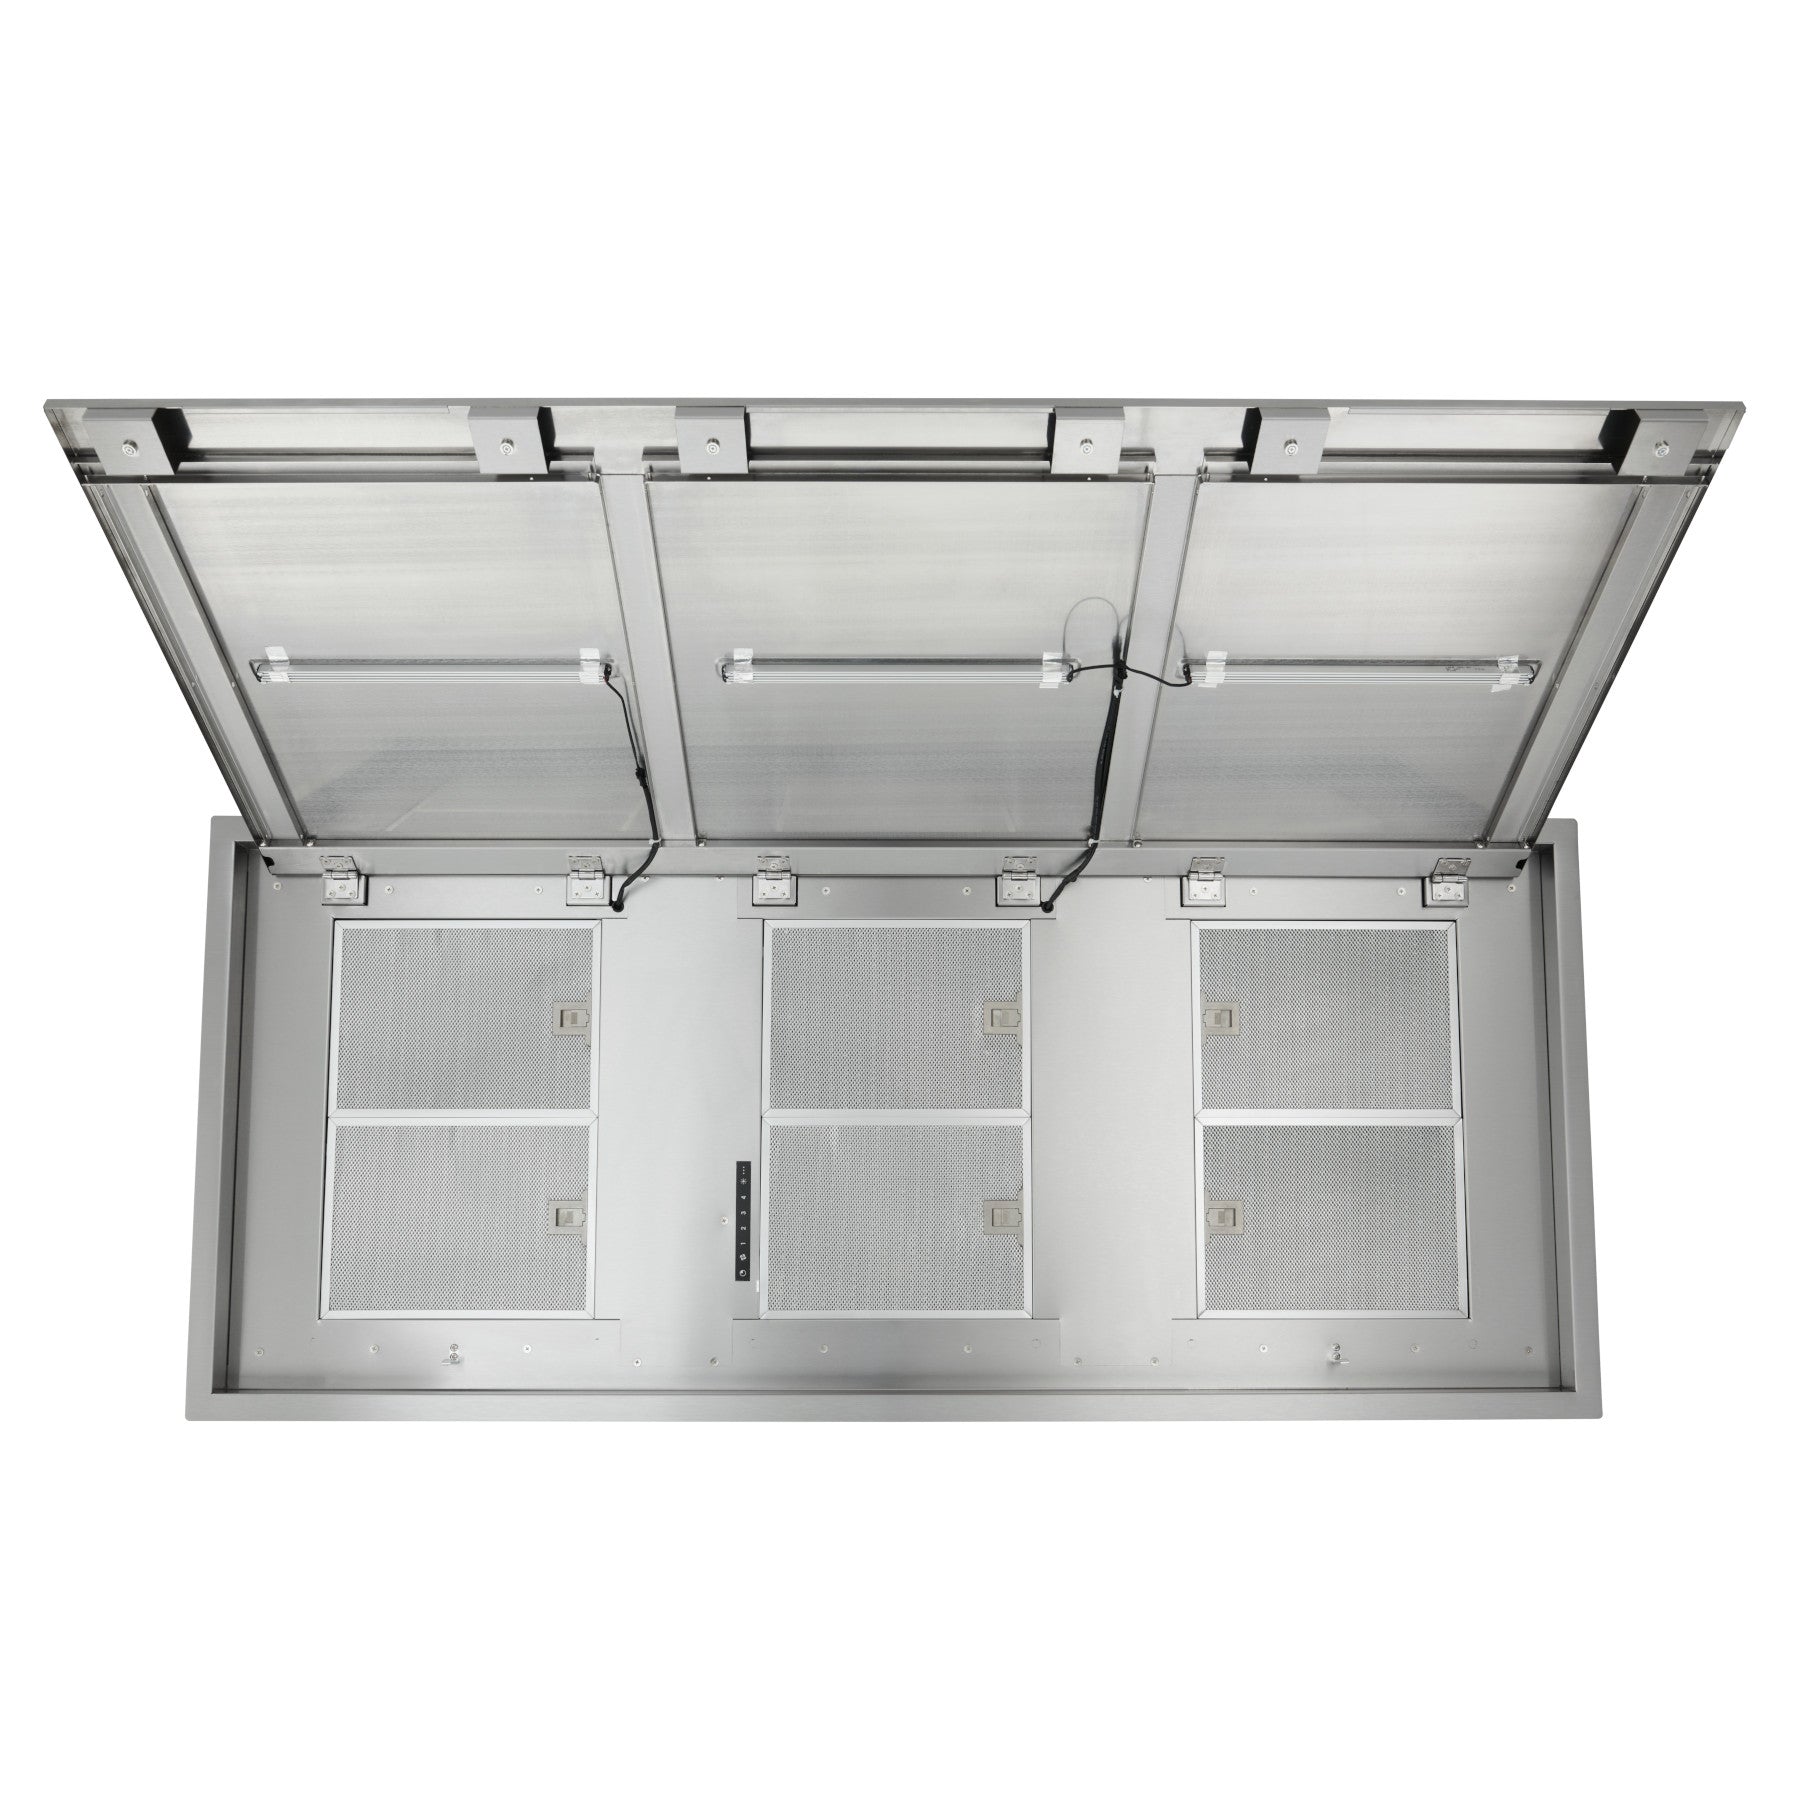 Best - 63.5 Inch Ceiling Mounted Range Hood Vent in Stainless - HBC163ESS